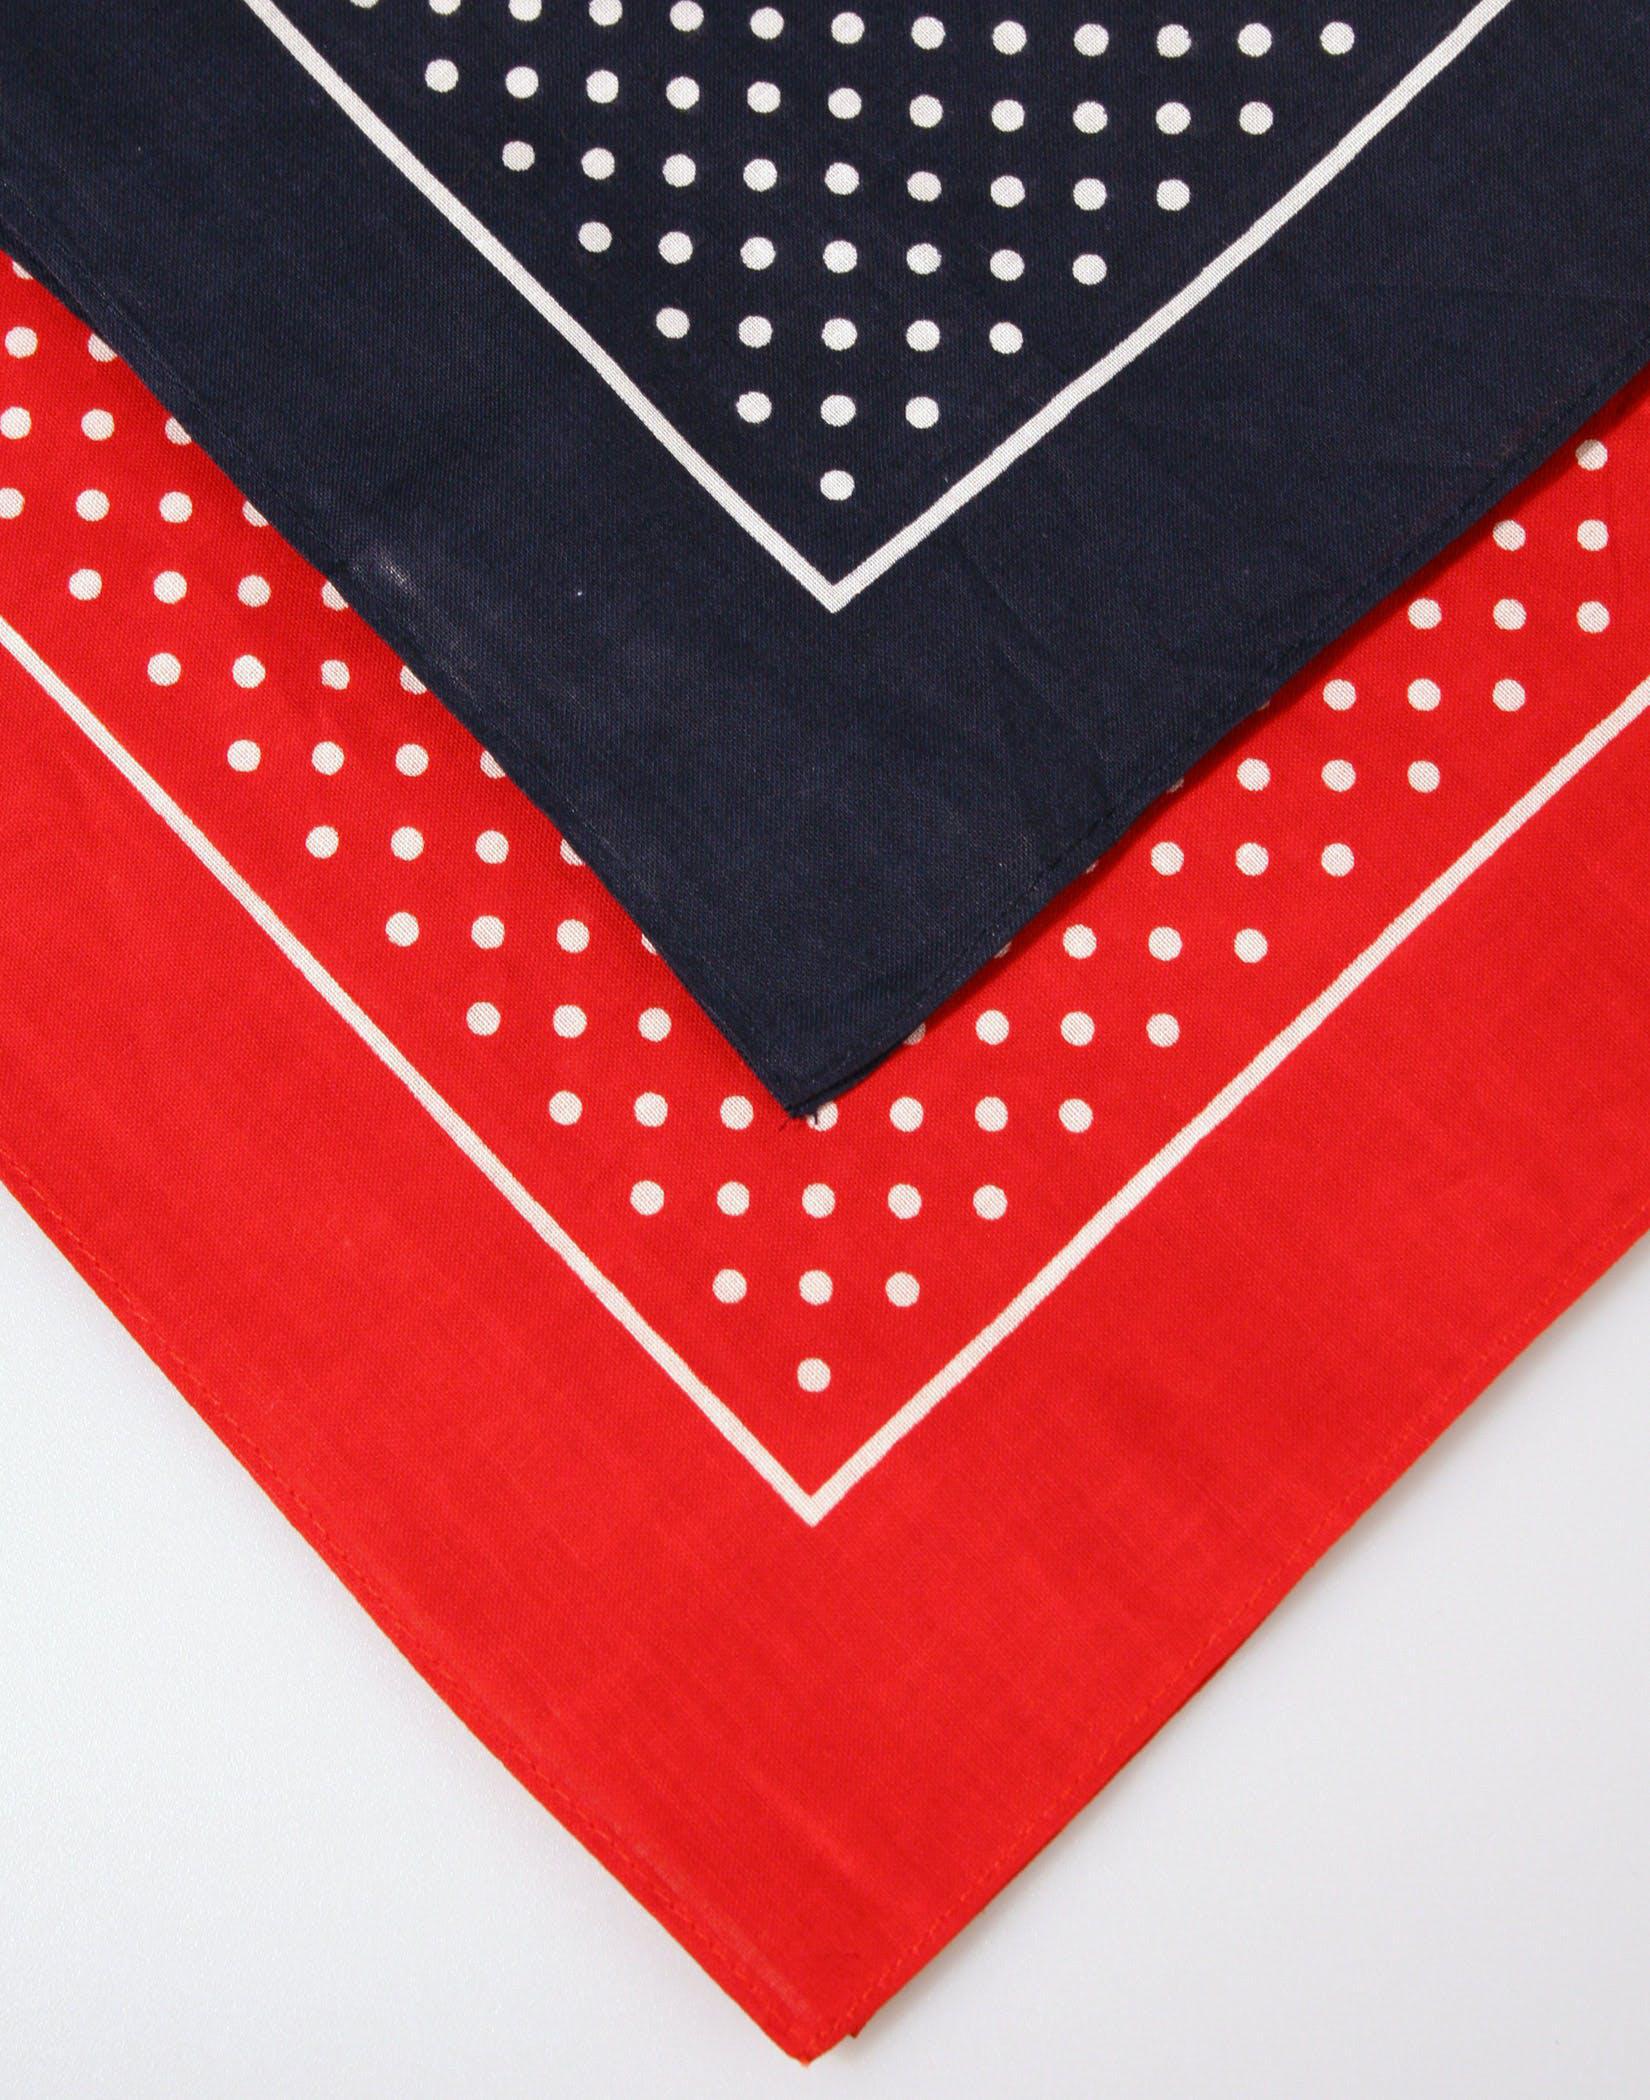 Spotted Cotton Handkerchiefs - Box of 3 - 2Red/1Blue